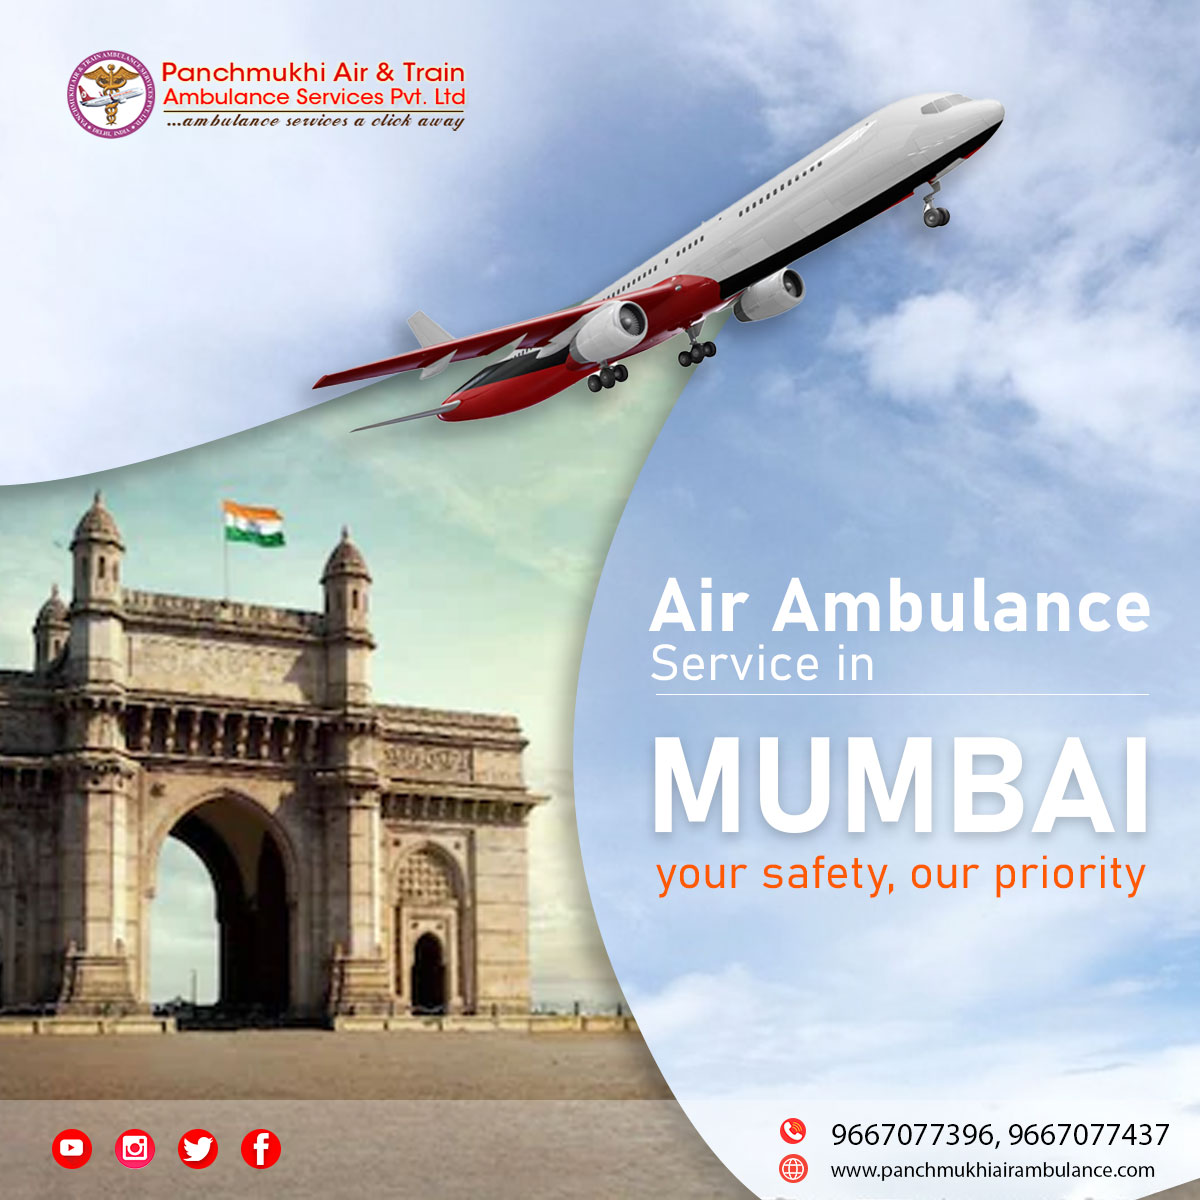 Panchmukhi Air Ambulance Services in Mumbai has a History of Serving Hundred Percent Safety Medical Transport